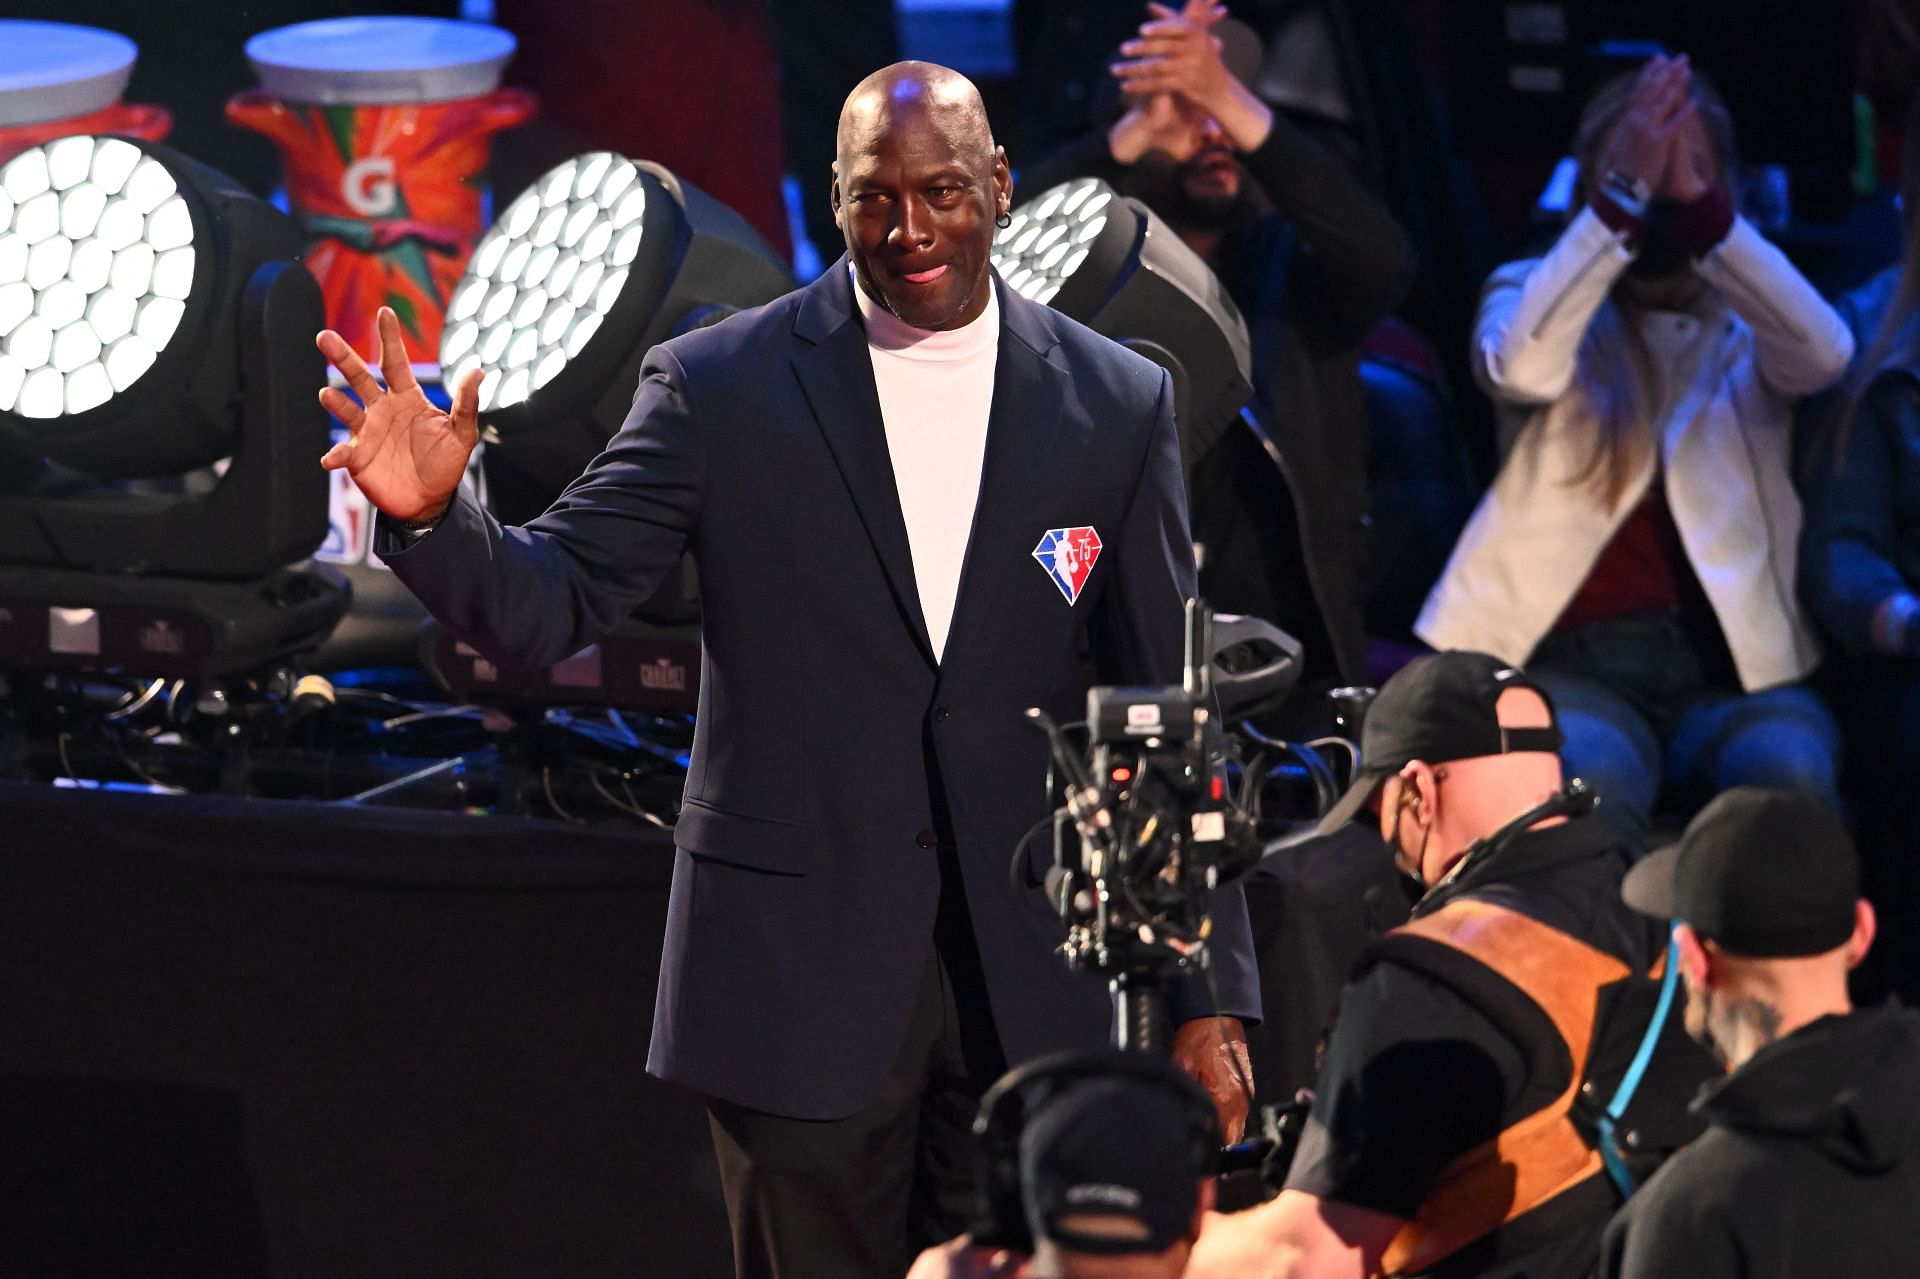 Michael Jordan reacts after being introduced as part of the NBA 75th Anniversary Team during the 2022 NBA All-Star Game